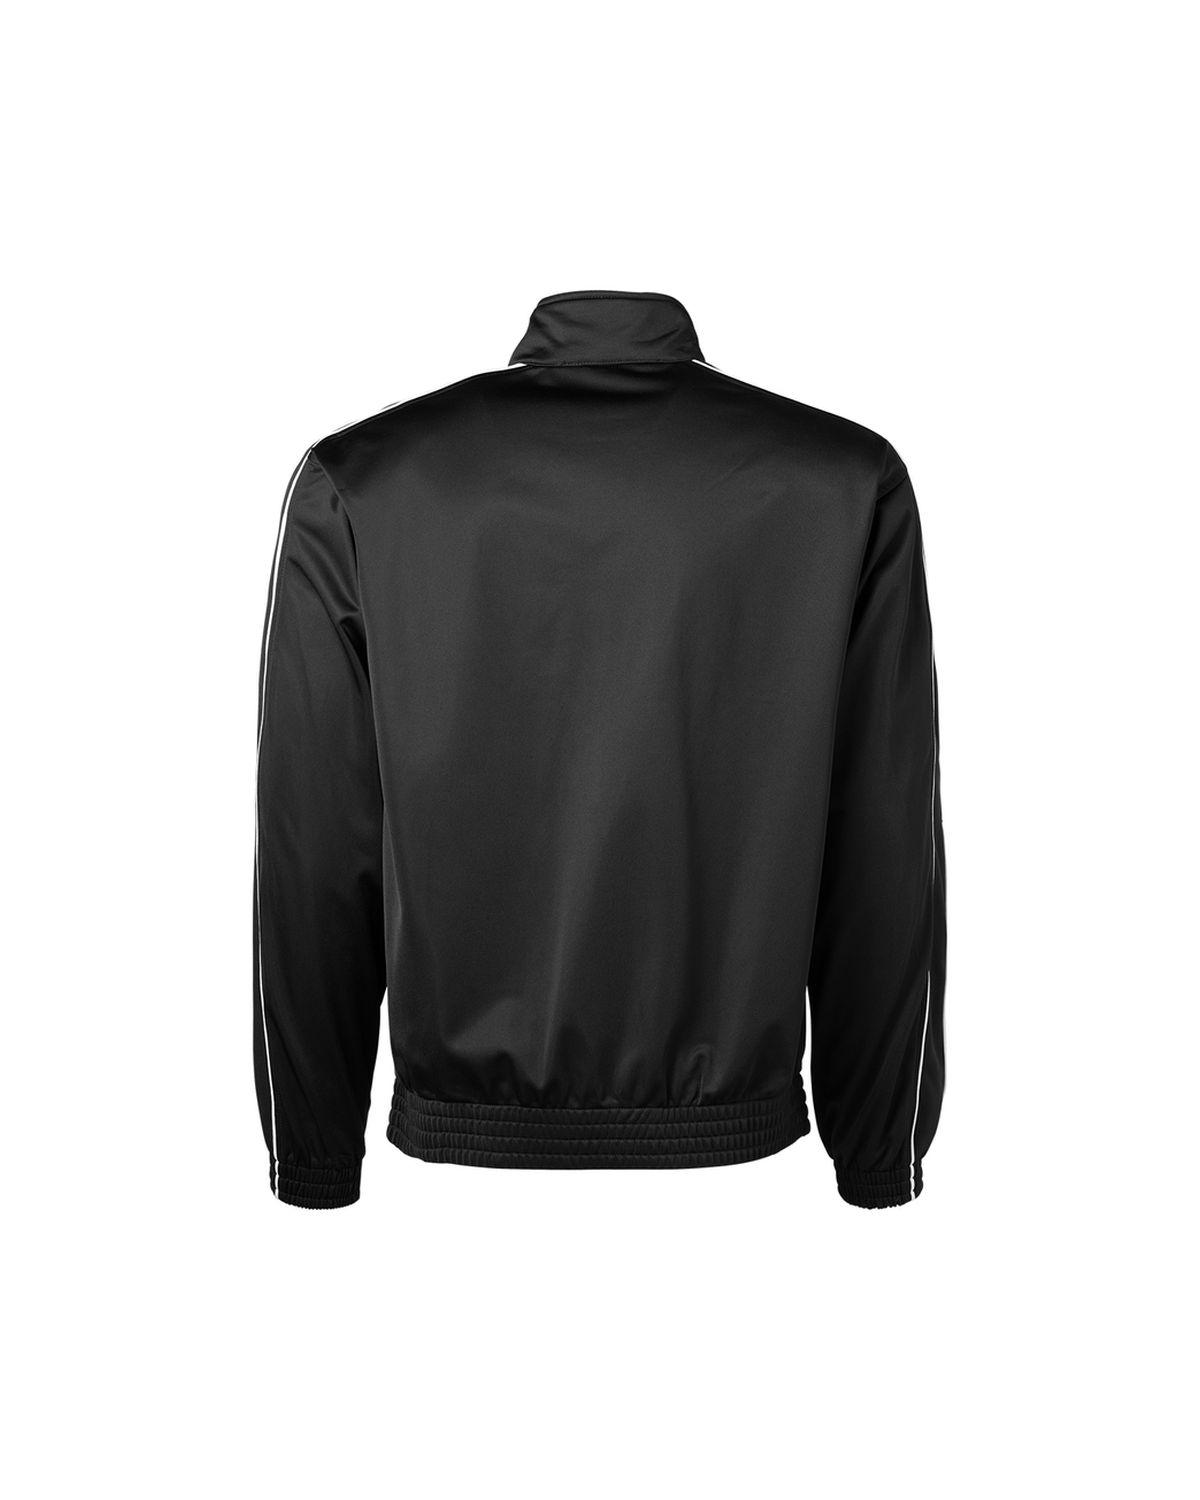 'Soffe 3265 Adult Classic Warmup Jacket '